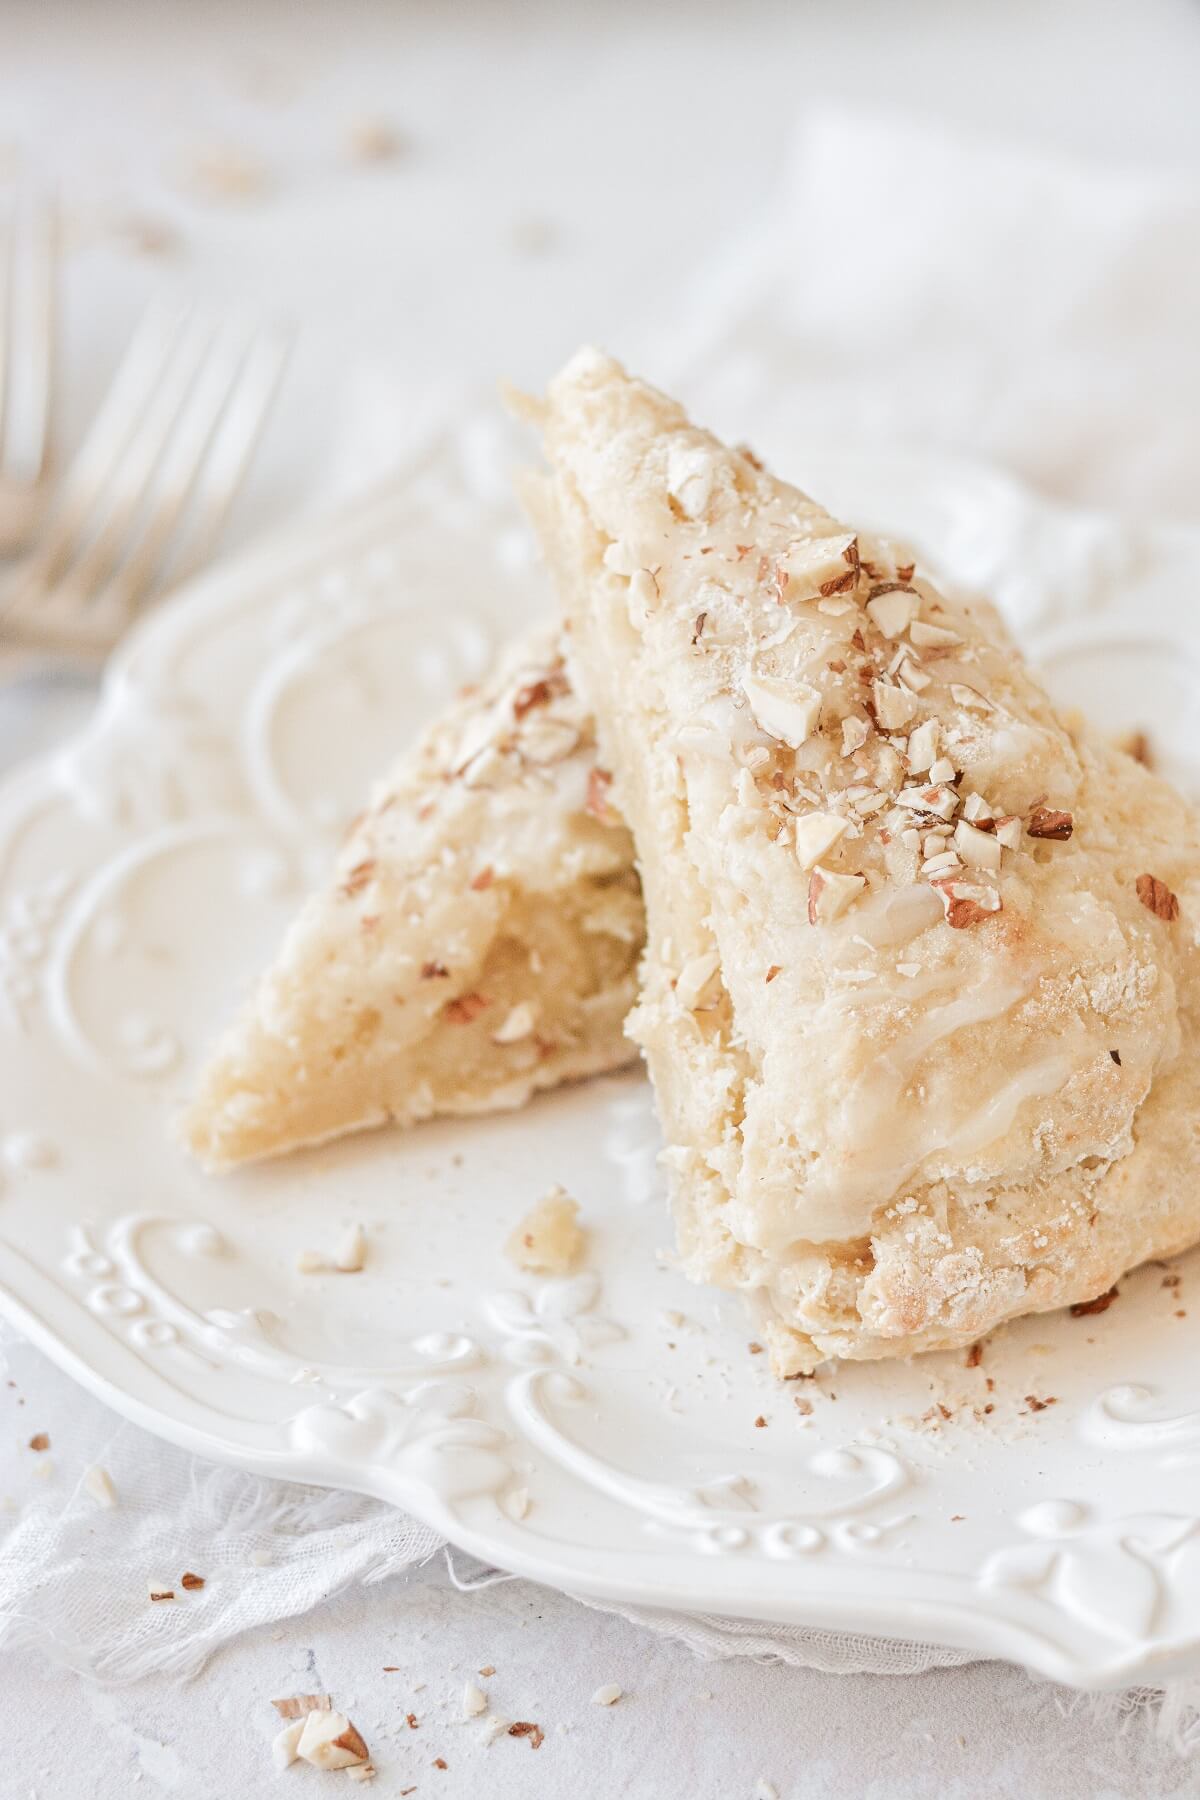 Almond cream cheese scones sprinkled with almonds, on a white plate.